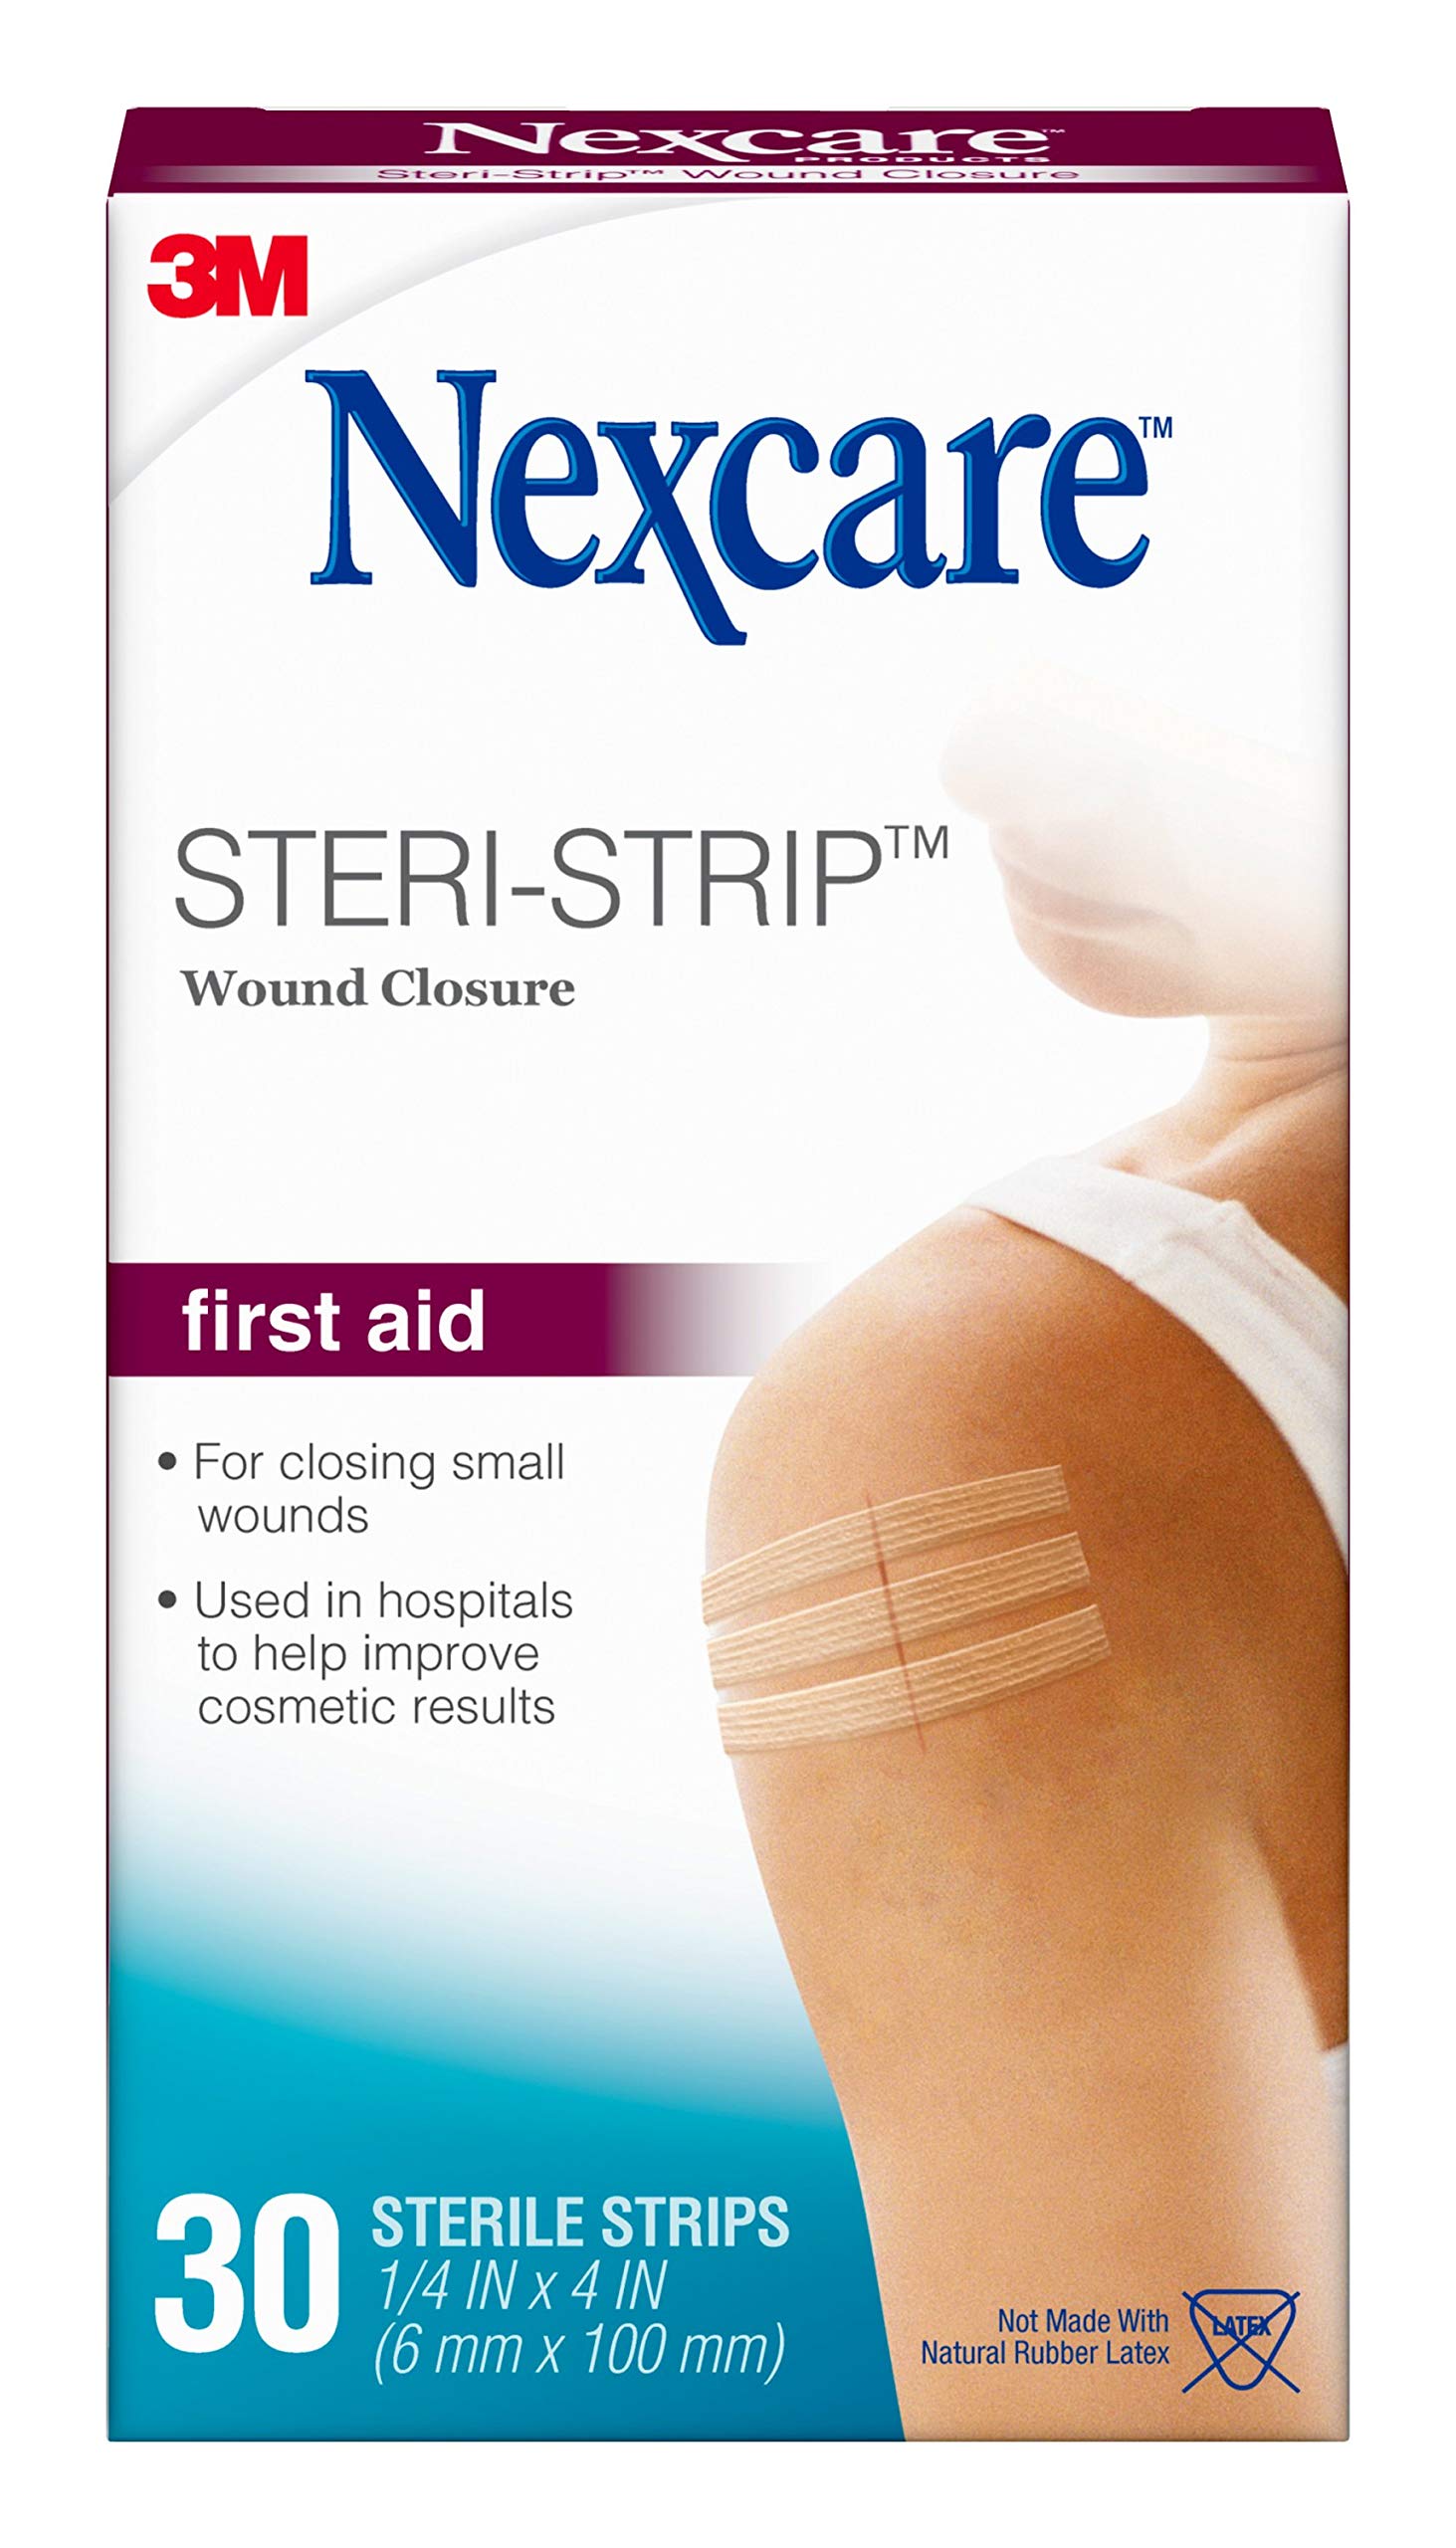 Nexcare Steri-Strip Skin Closure, Hypoallergenic, Securing, Closing Supporting Cuts And Wounds, Suture, Staple Removal, 0.25 x 4 in, 30 Count